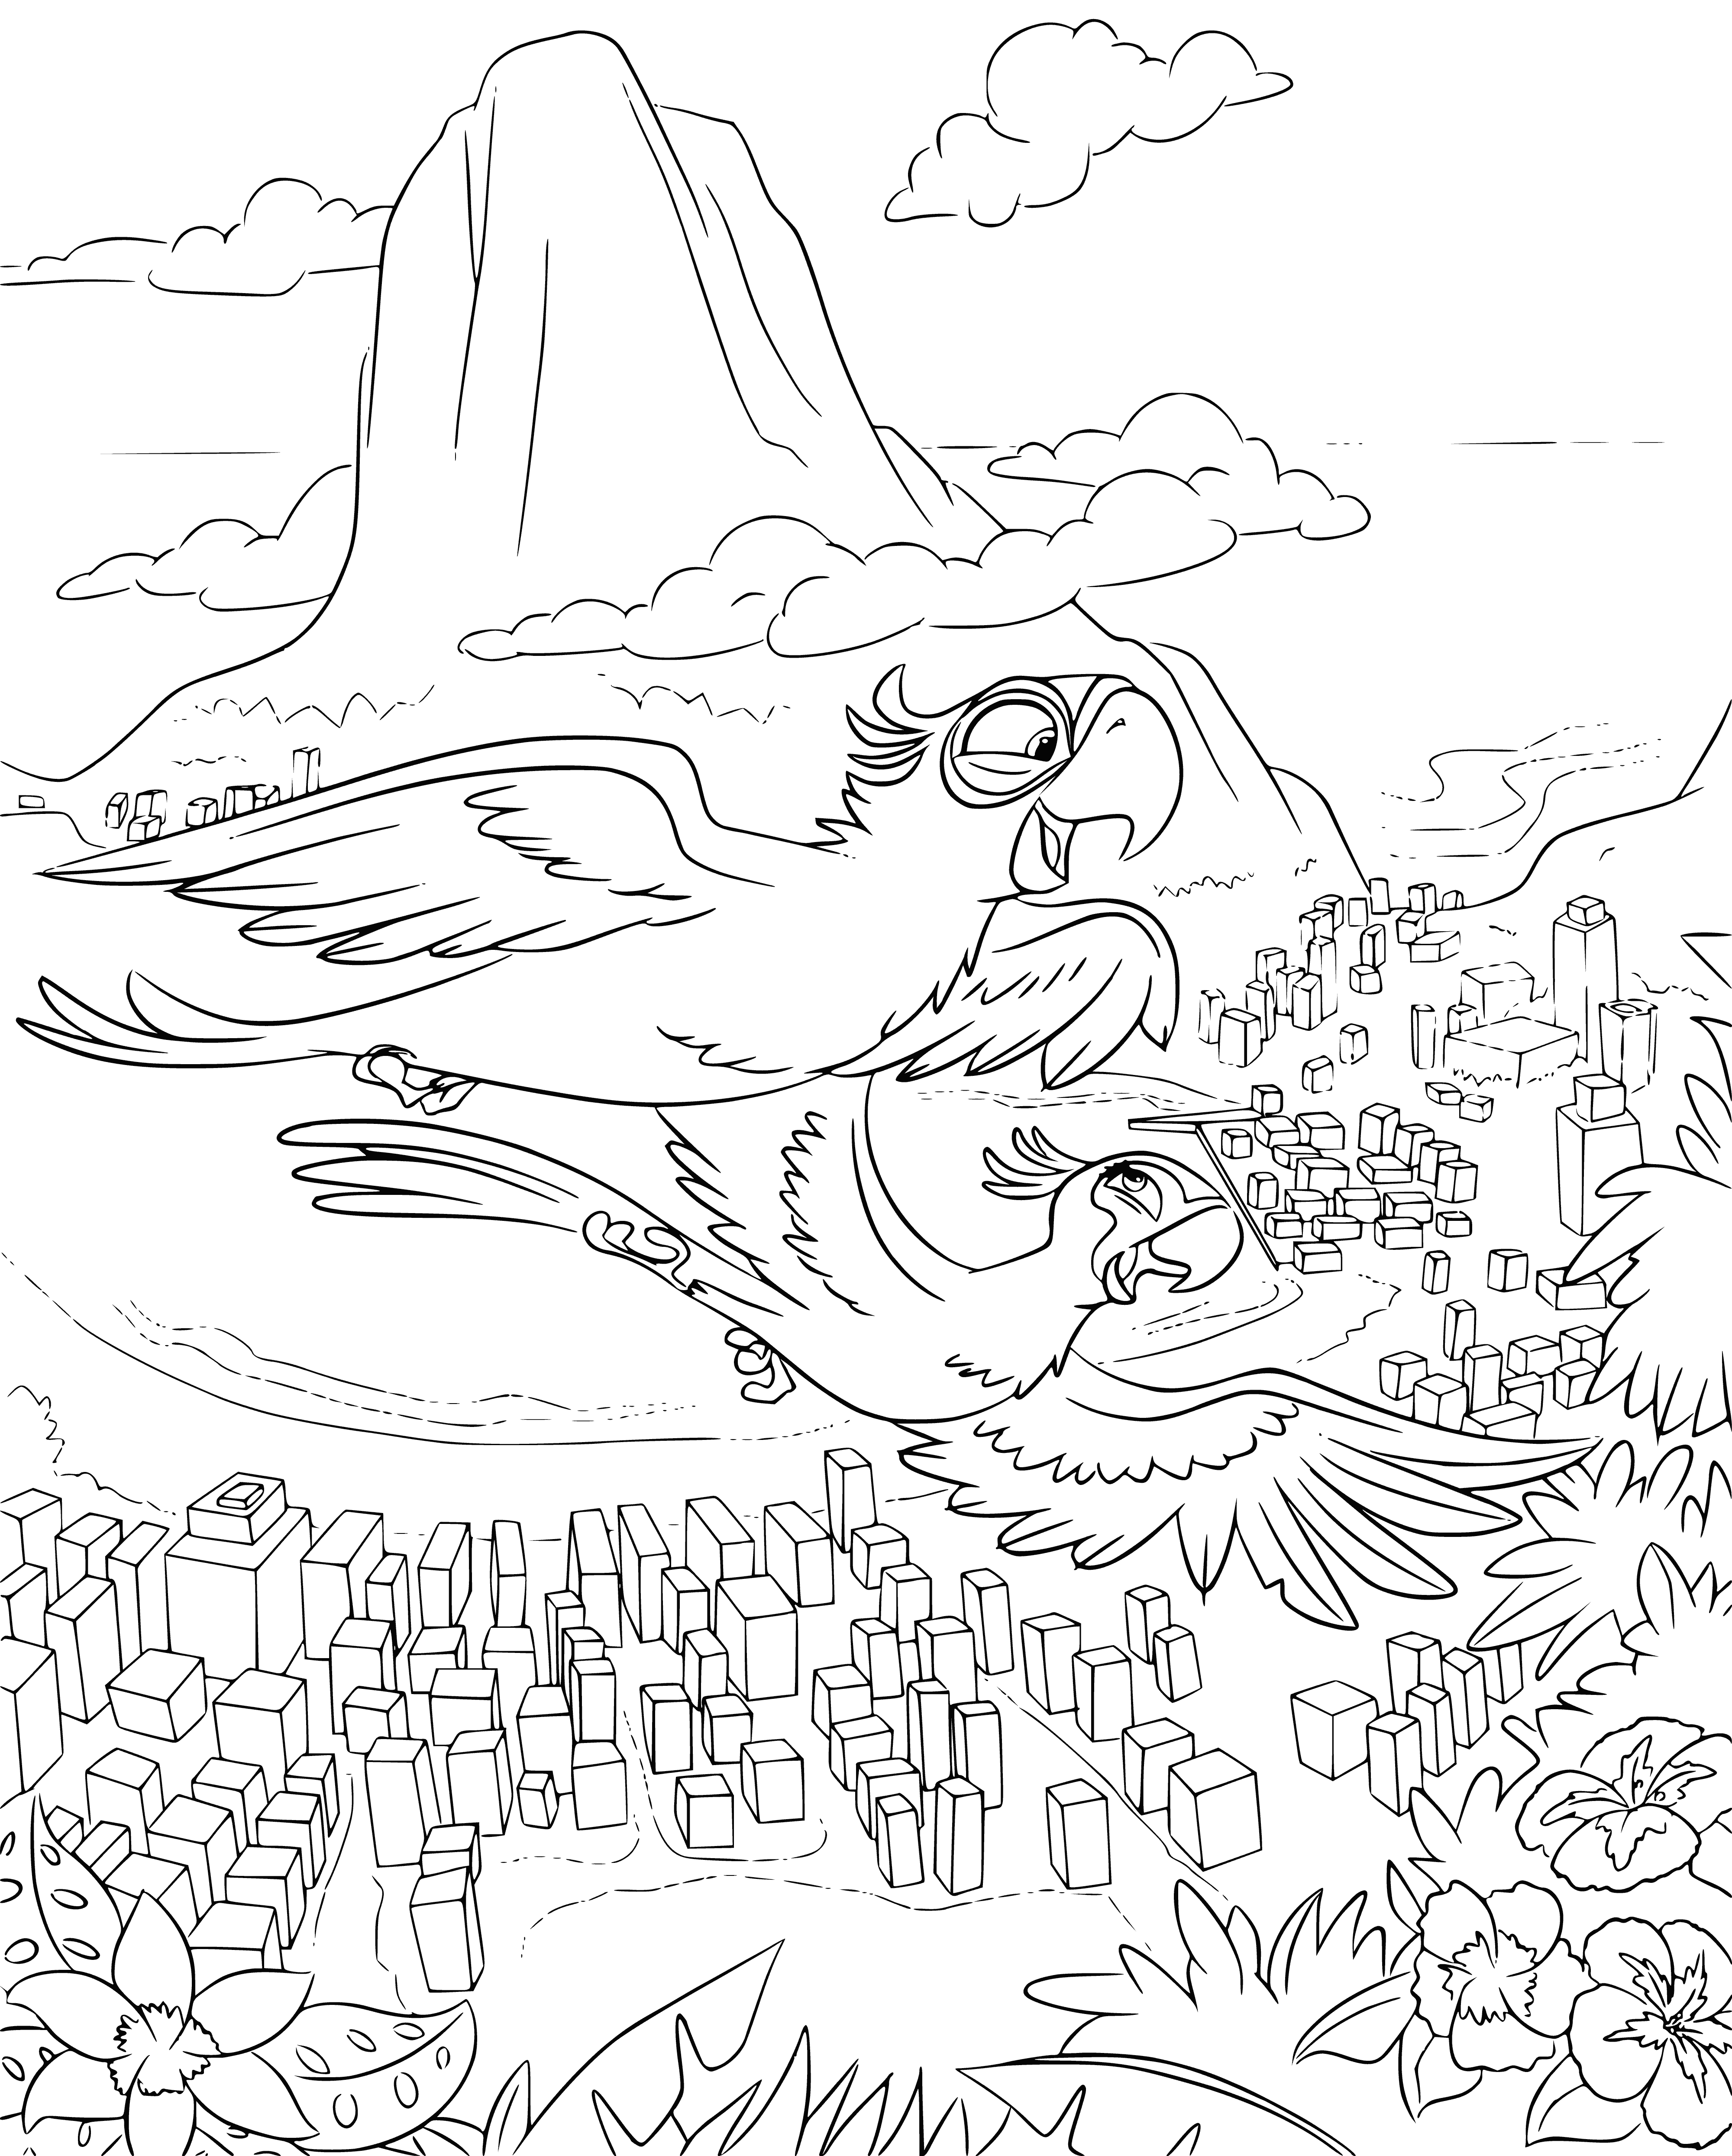 Together coloring page